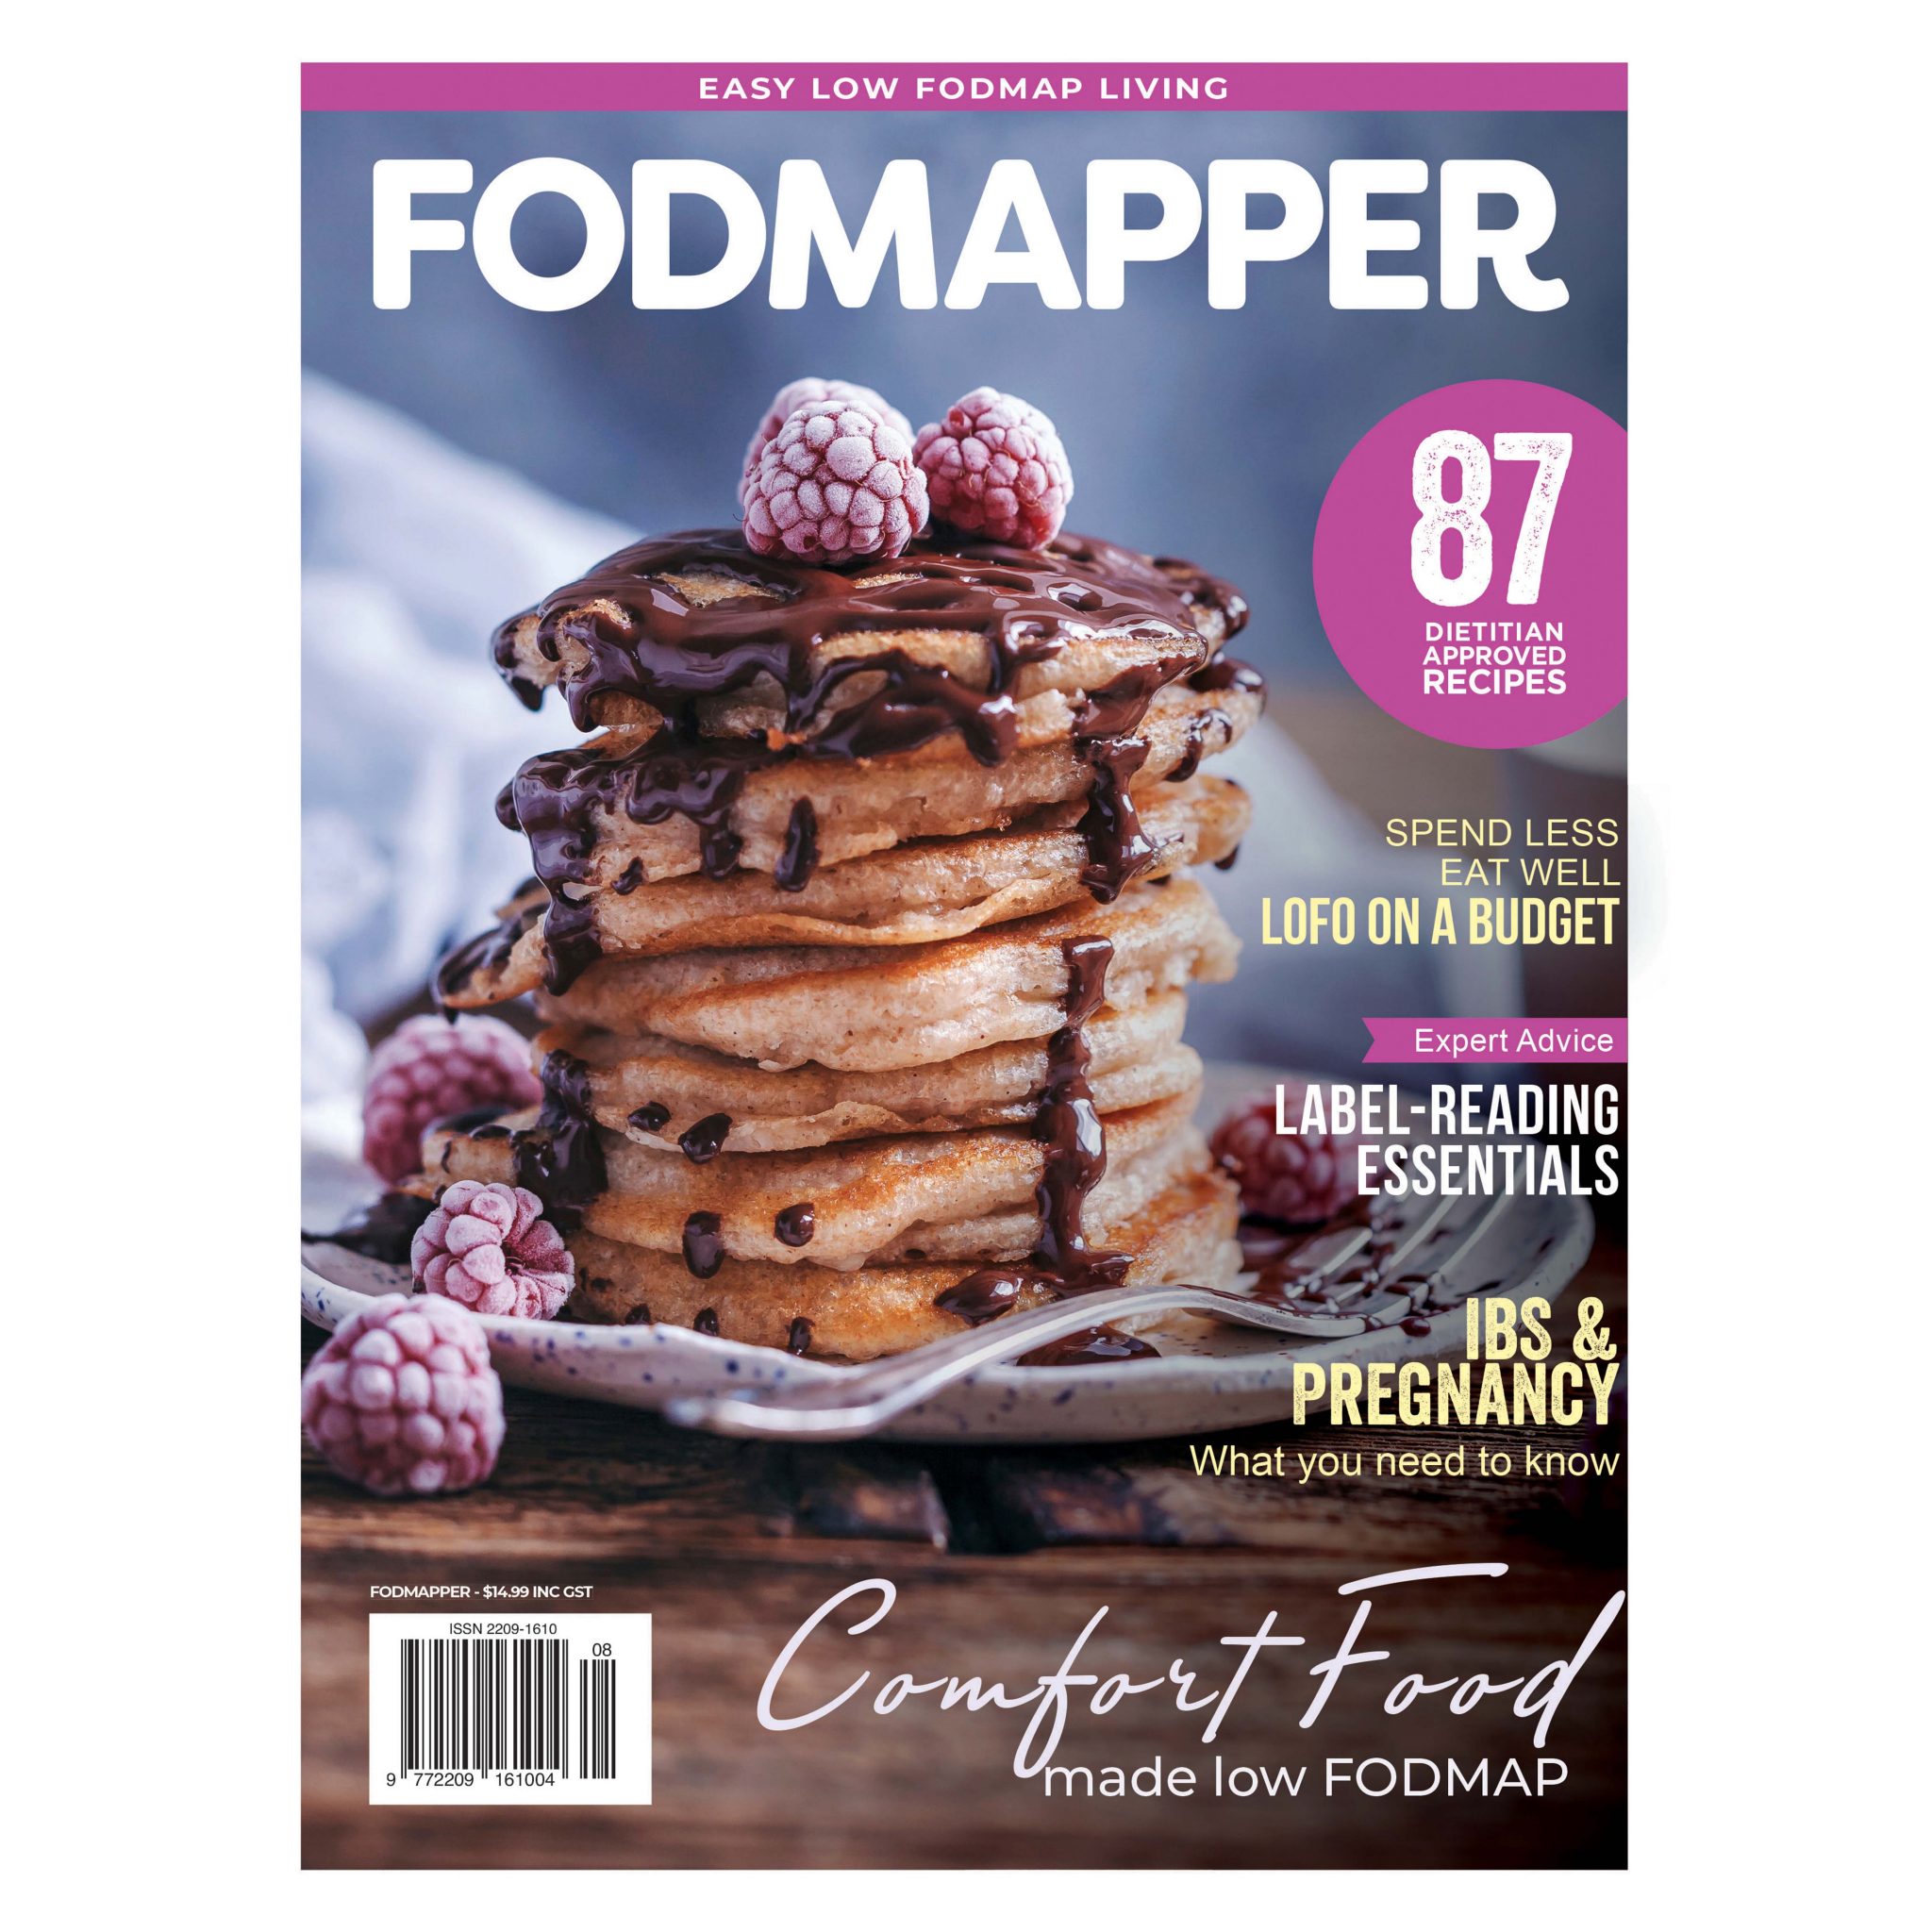 Cover of FODMAPPER issue 8 featuring a stack of fluffy gluten-free pancakes with chocolate sauce and raspberries.